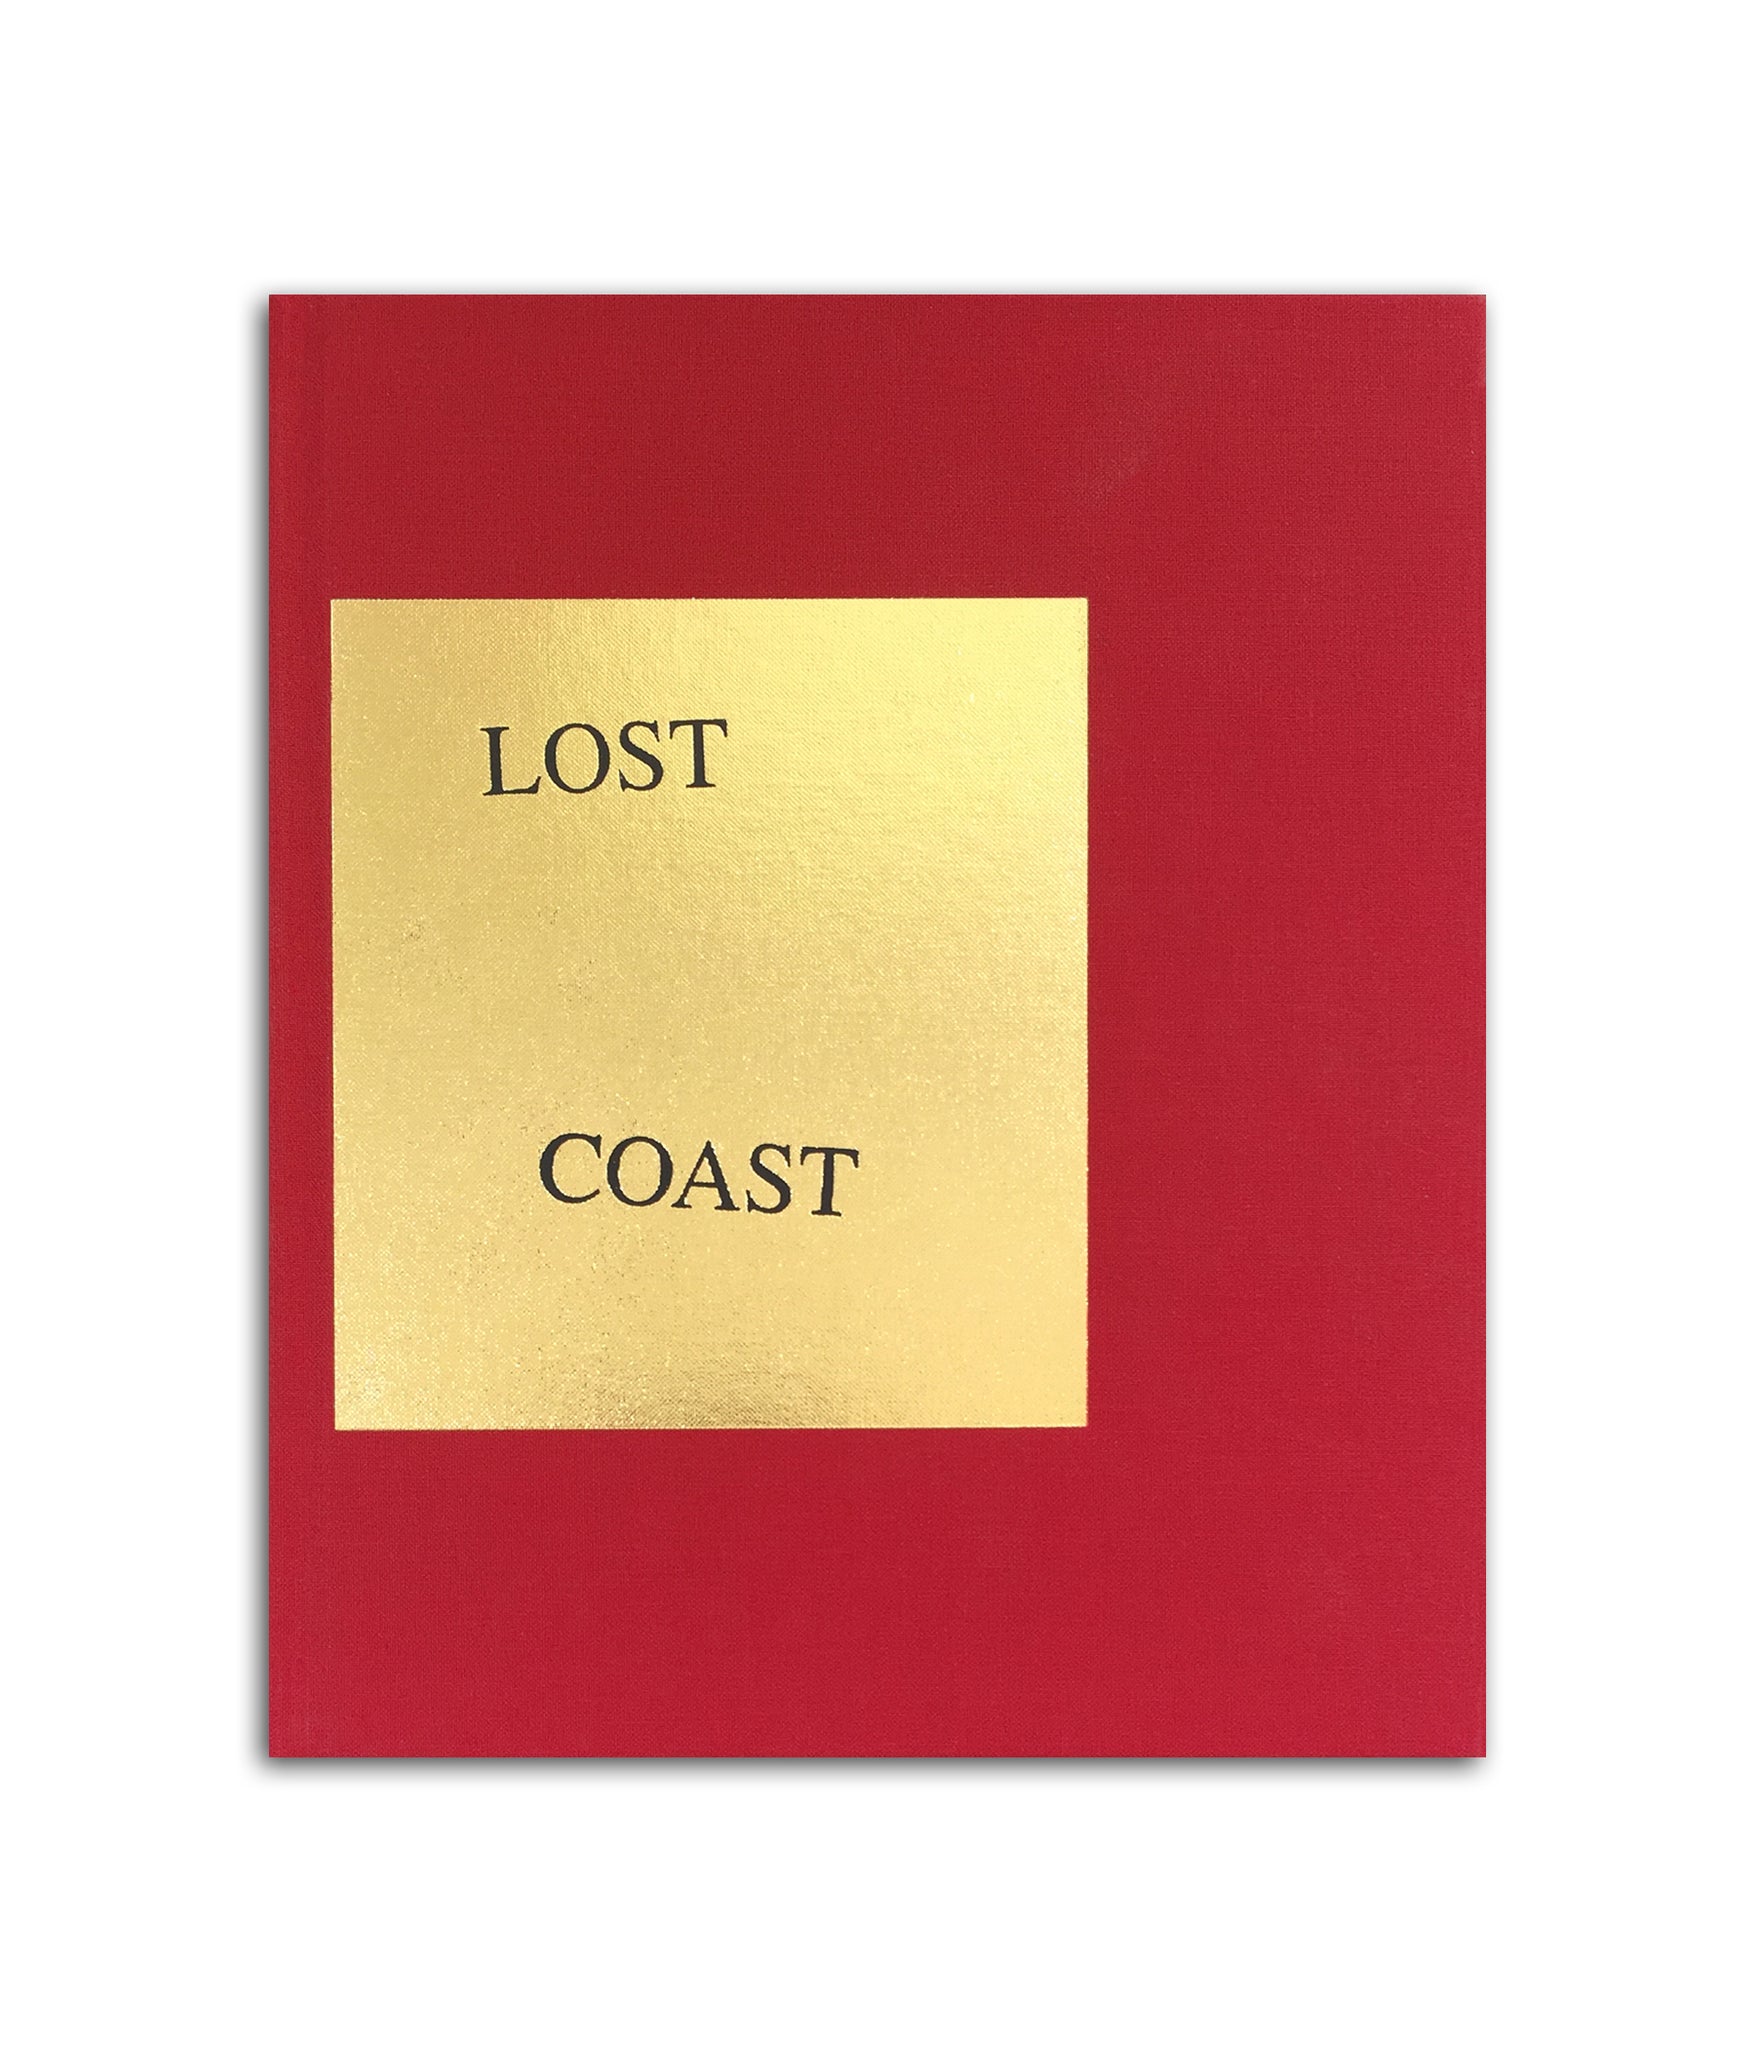 Lost Coast — First Edition